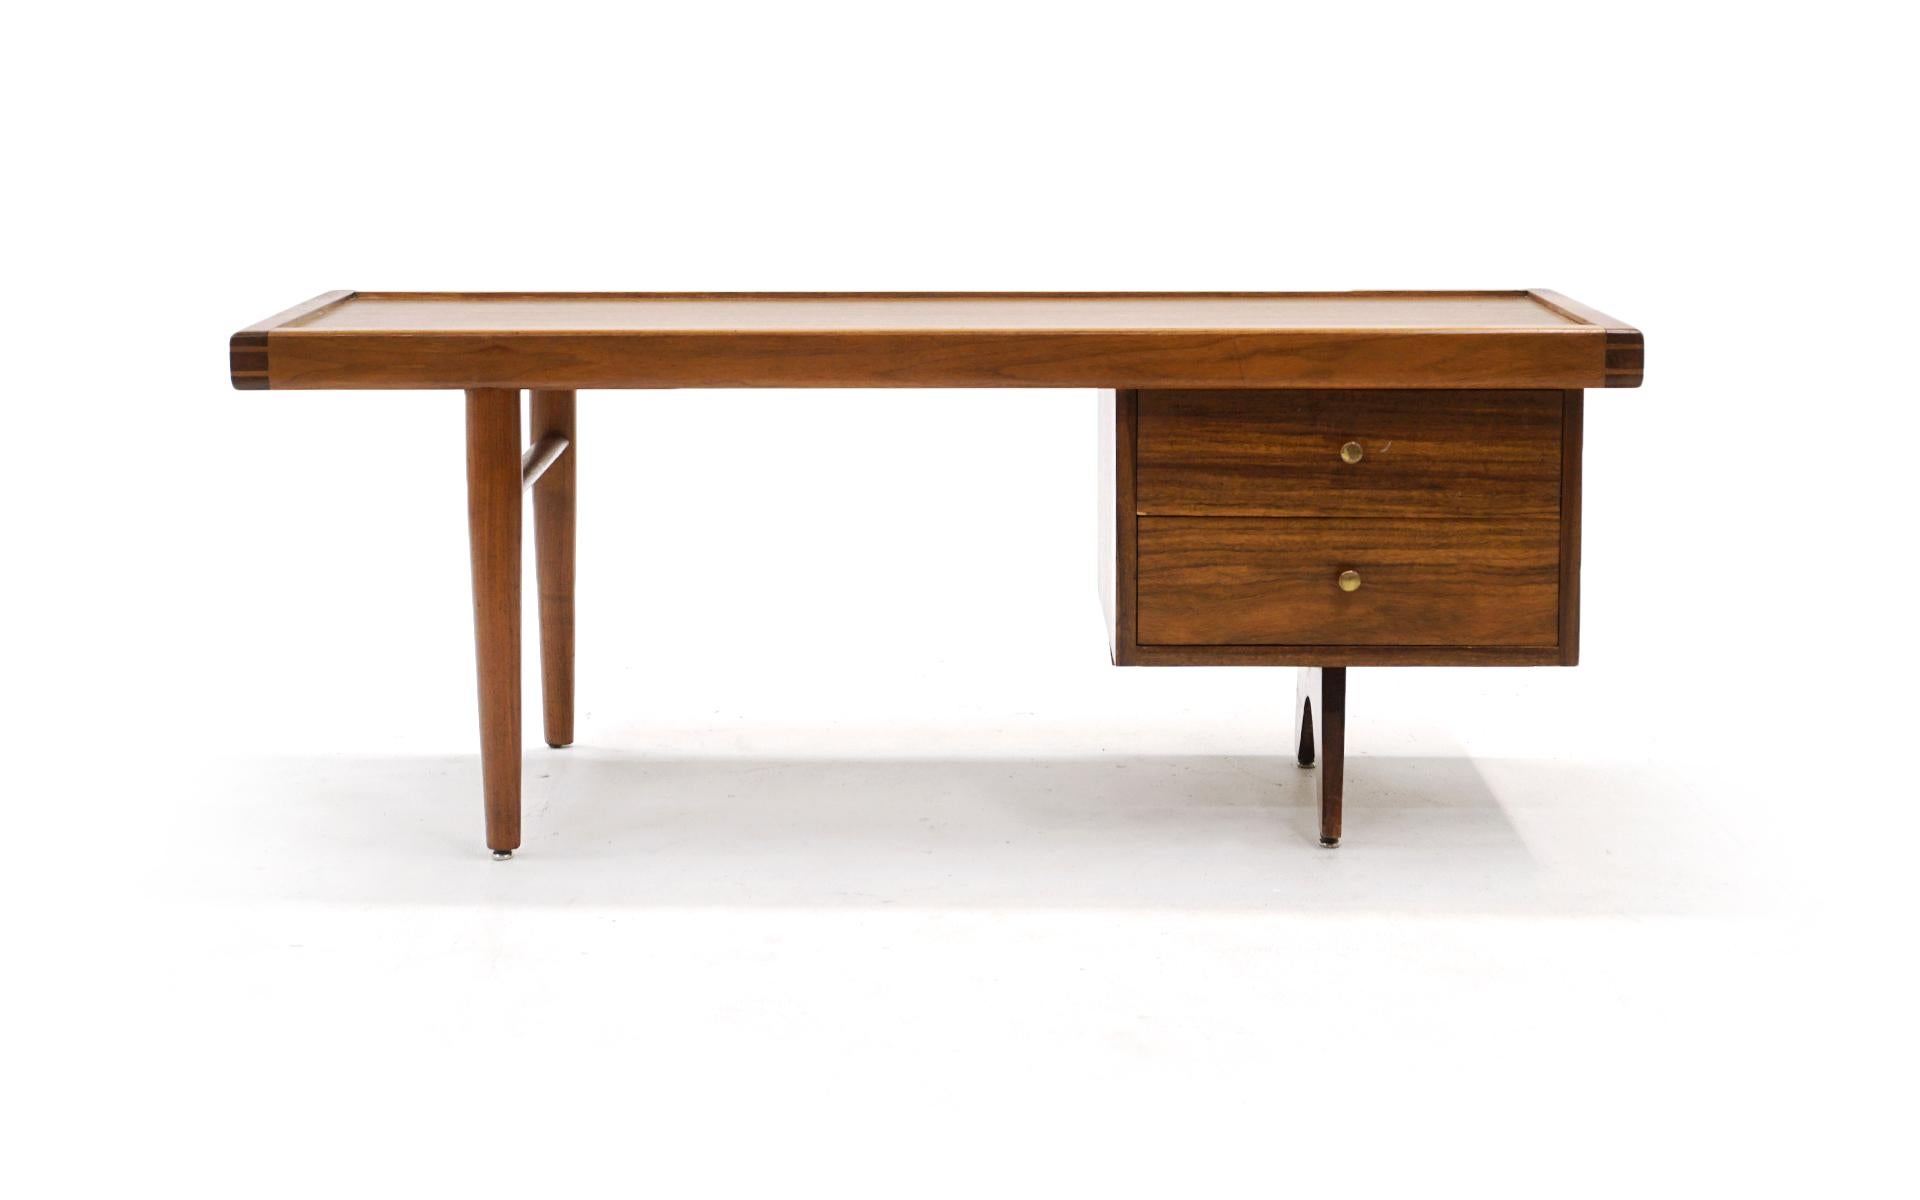 Rectangular coffee table model 217 designed by George Nakashima for his origin / origins series for Widdicomb, 1950s, in Sundra (meaning thing of beauty) finish.  Beautifully figured East Indian laurel wood with the original brass pulls and glass